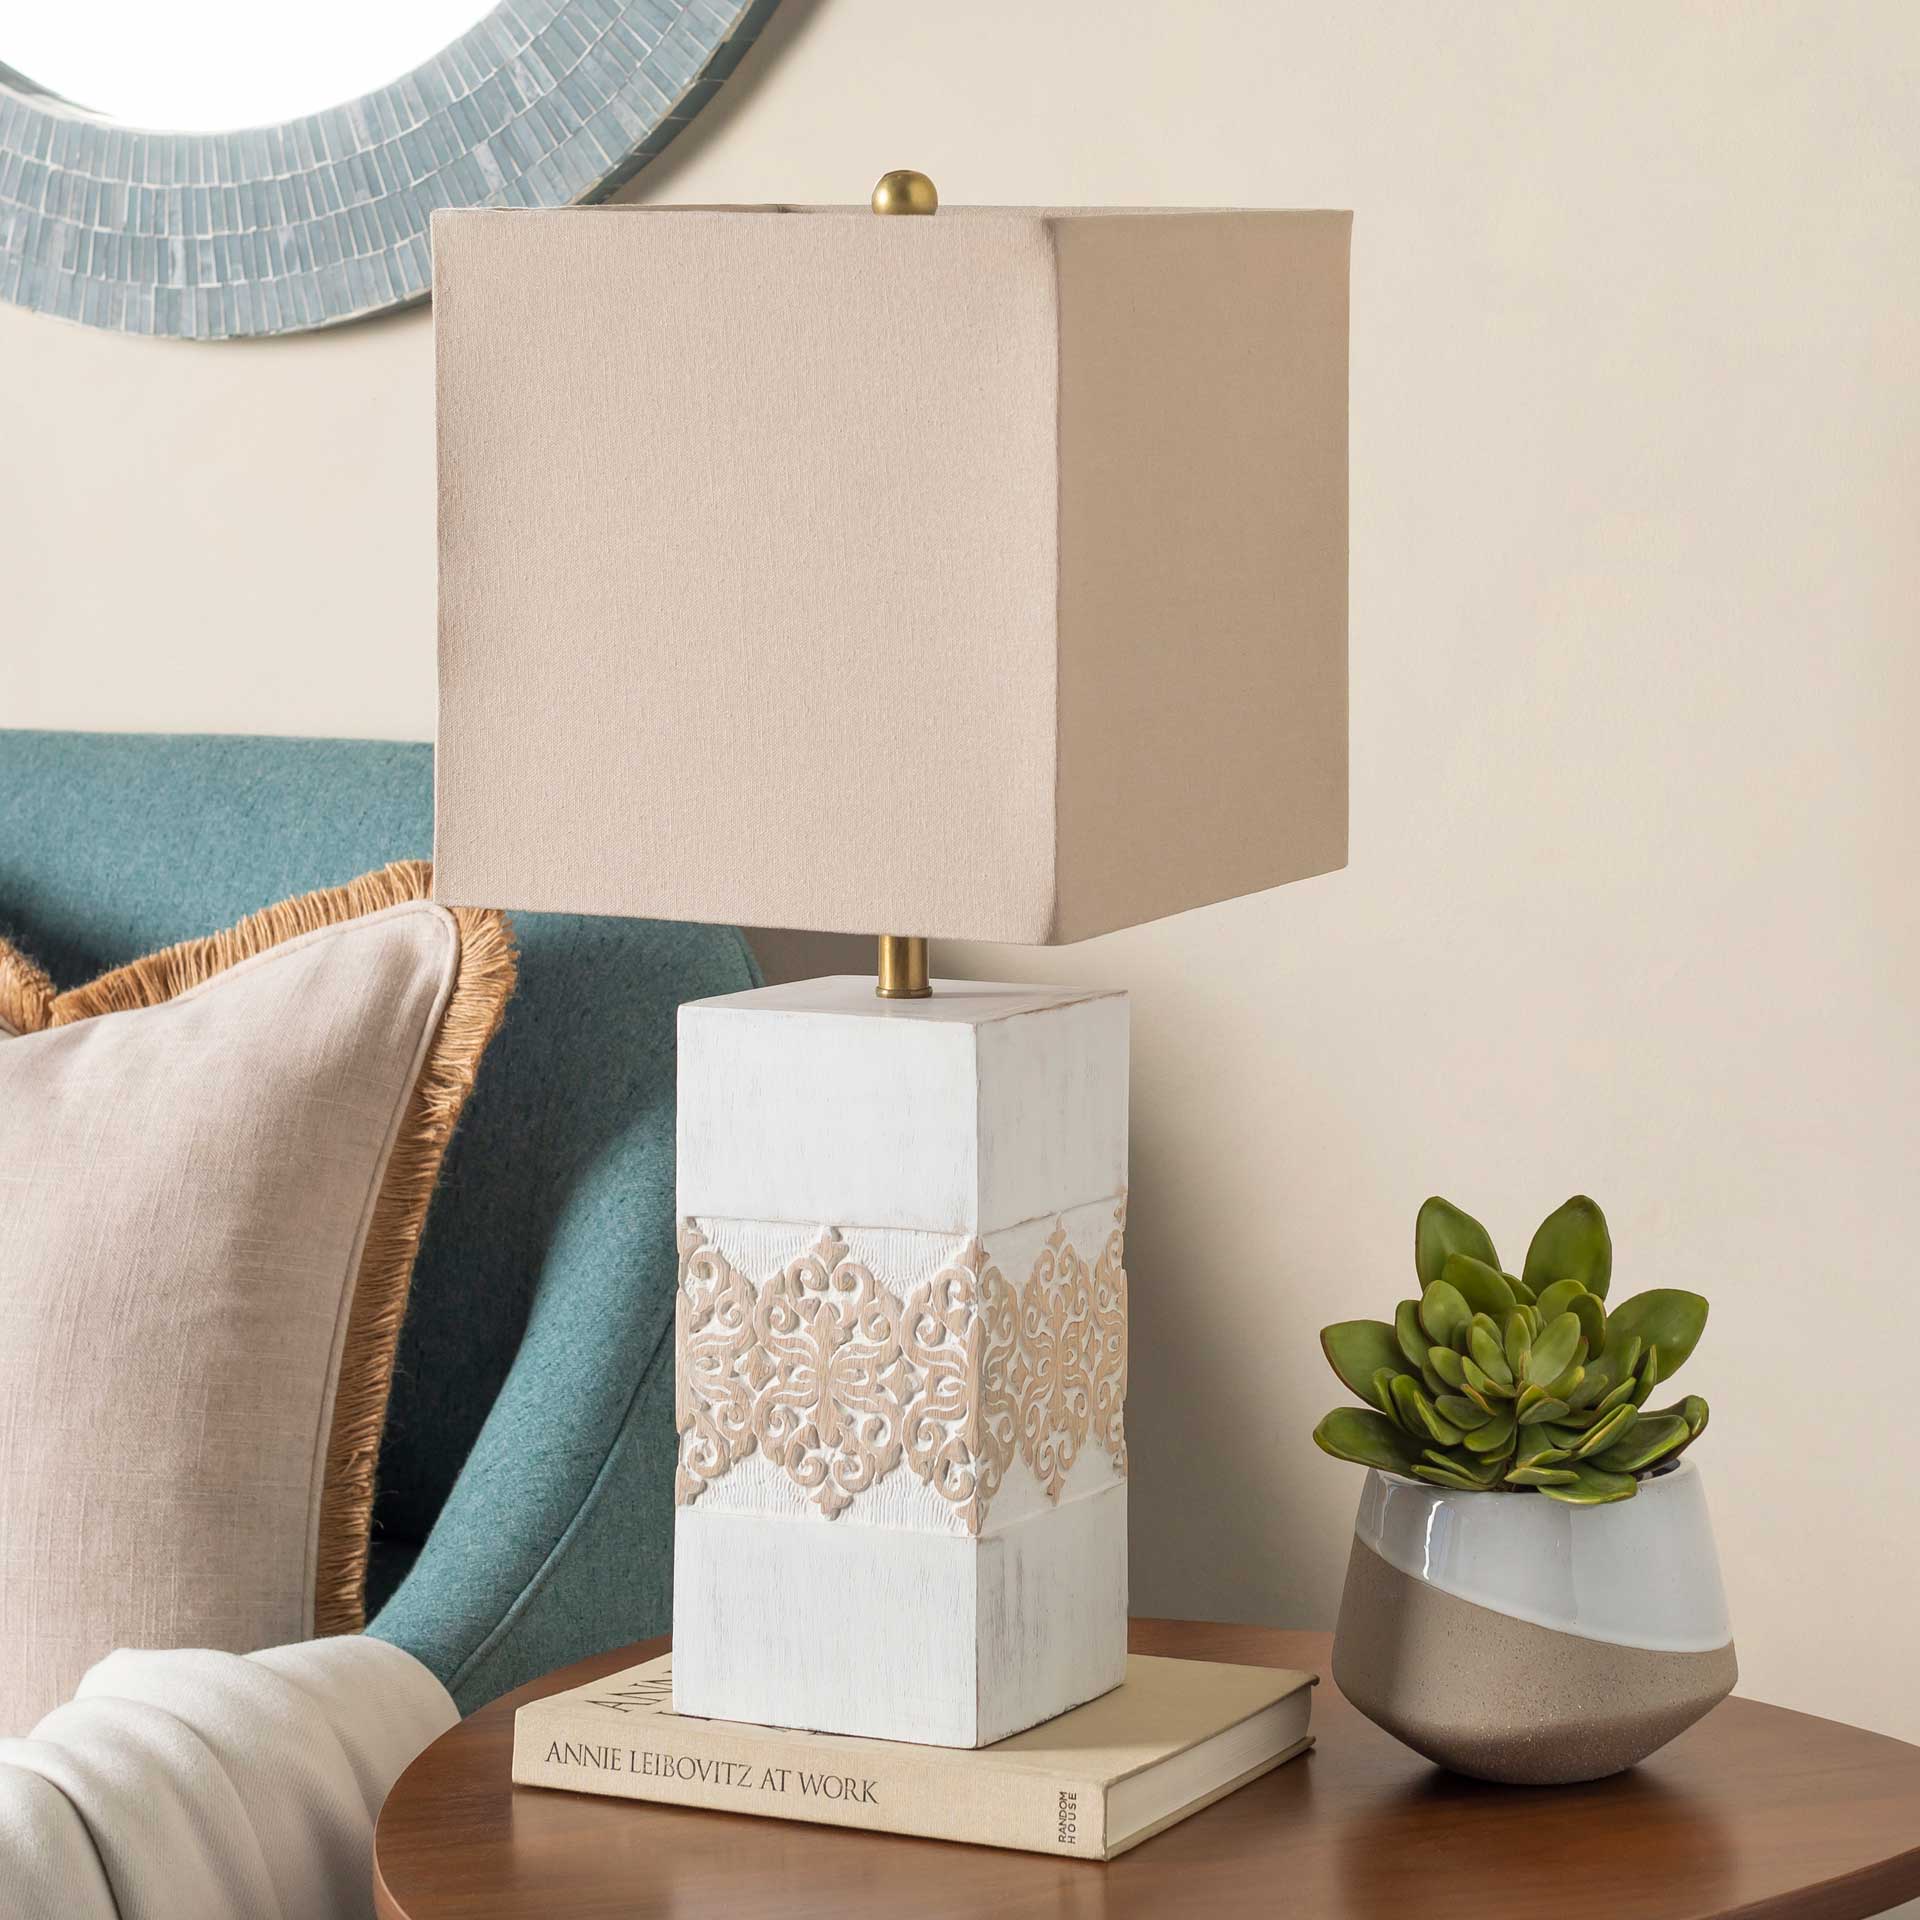 Cristian Table Lamp Taupe/White